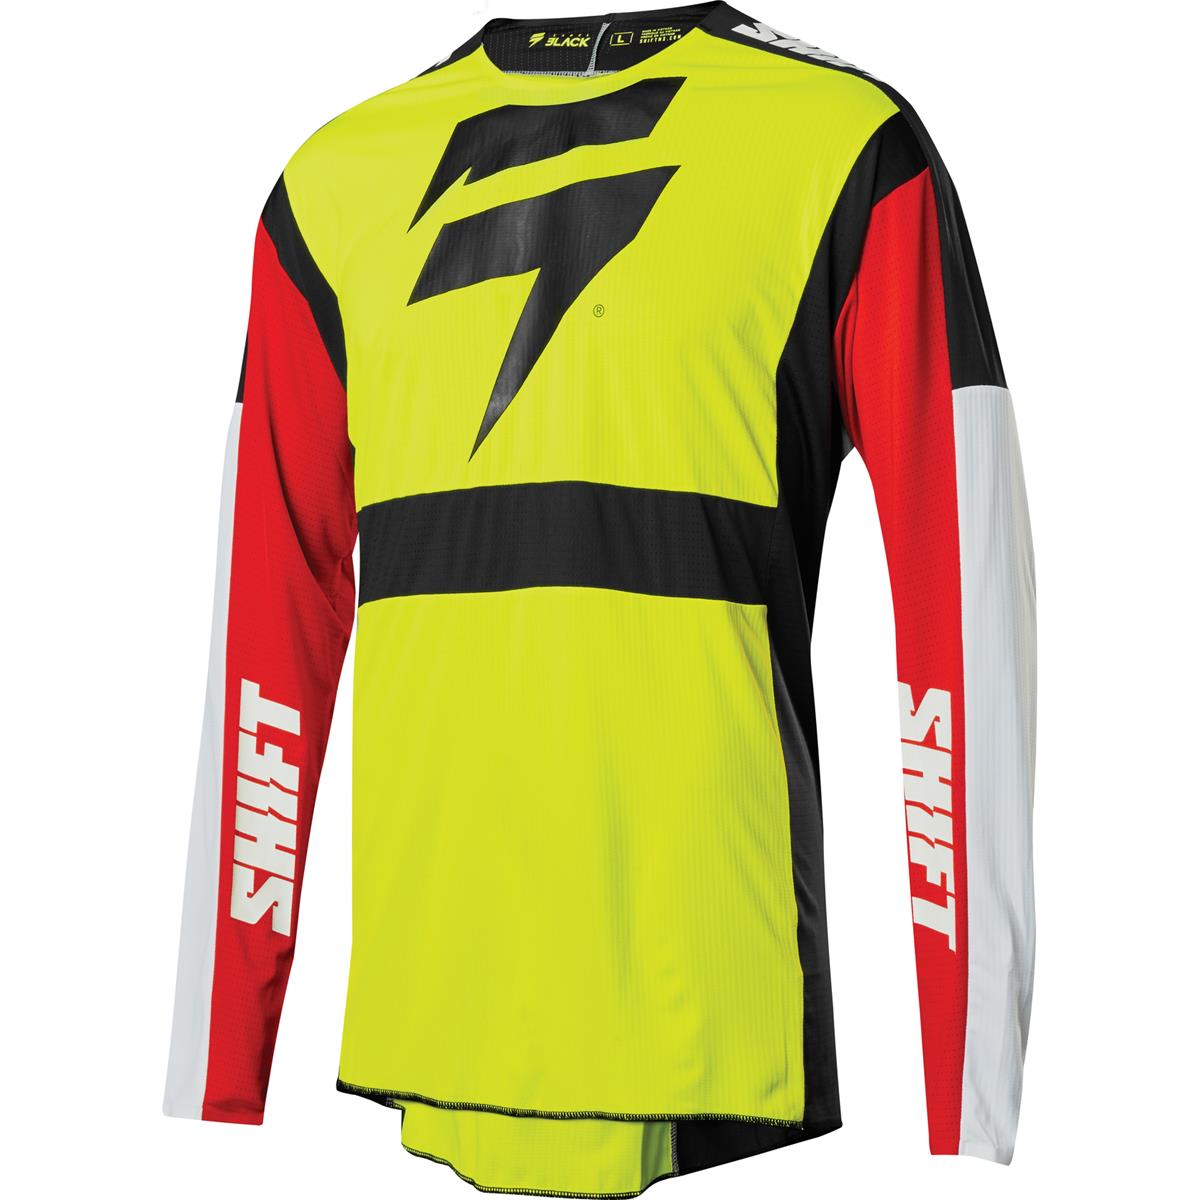 Shift Jersey 3lack Label Race Fluo Yellow